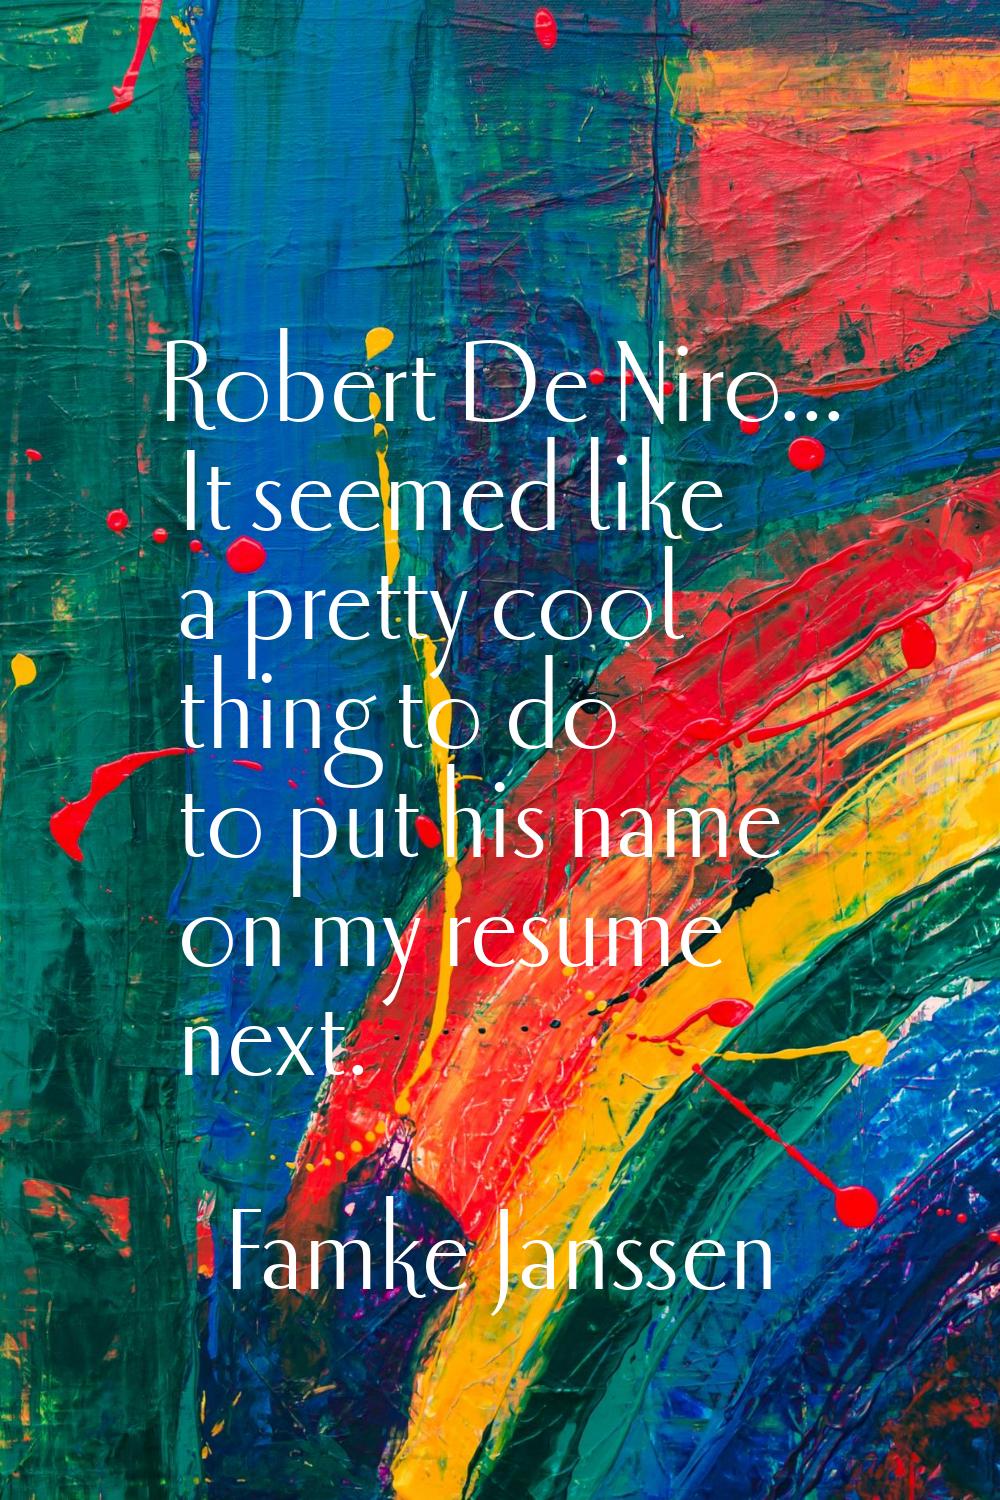 Robert De Niro... It seemed like a pretty cool thing to do to put his name on my resume next.